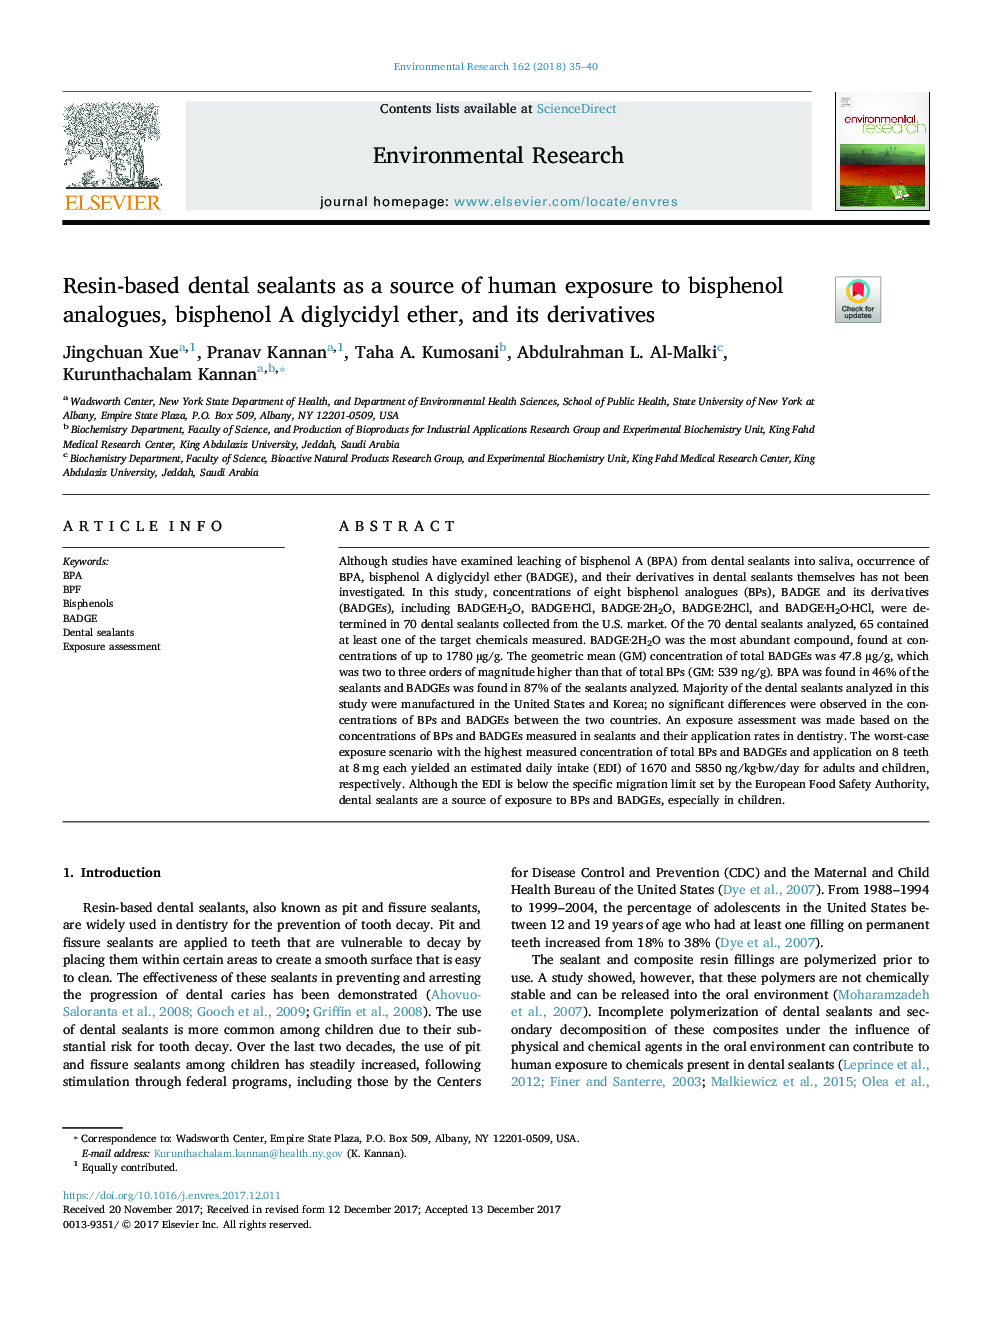 Resin-based dental sealants as a source of human exposure to bisphenol analogues, bisphenol A diglycidyl ether, and its derivatives